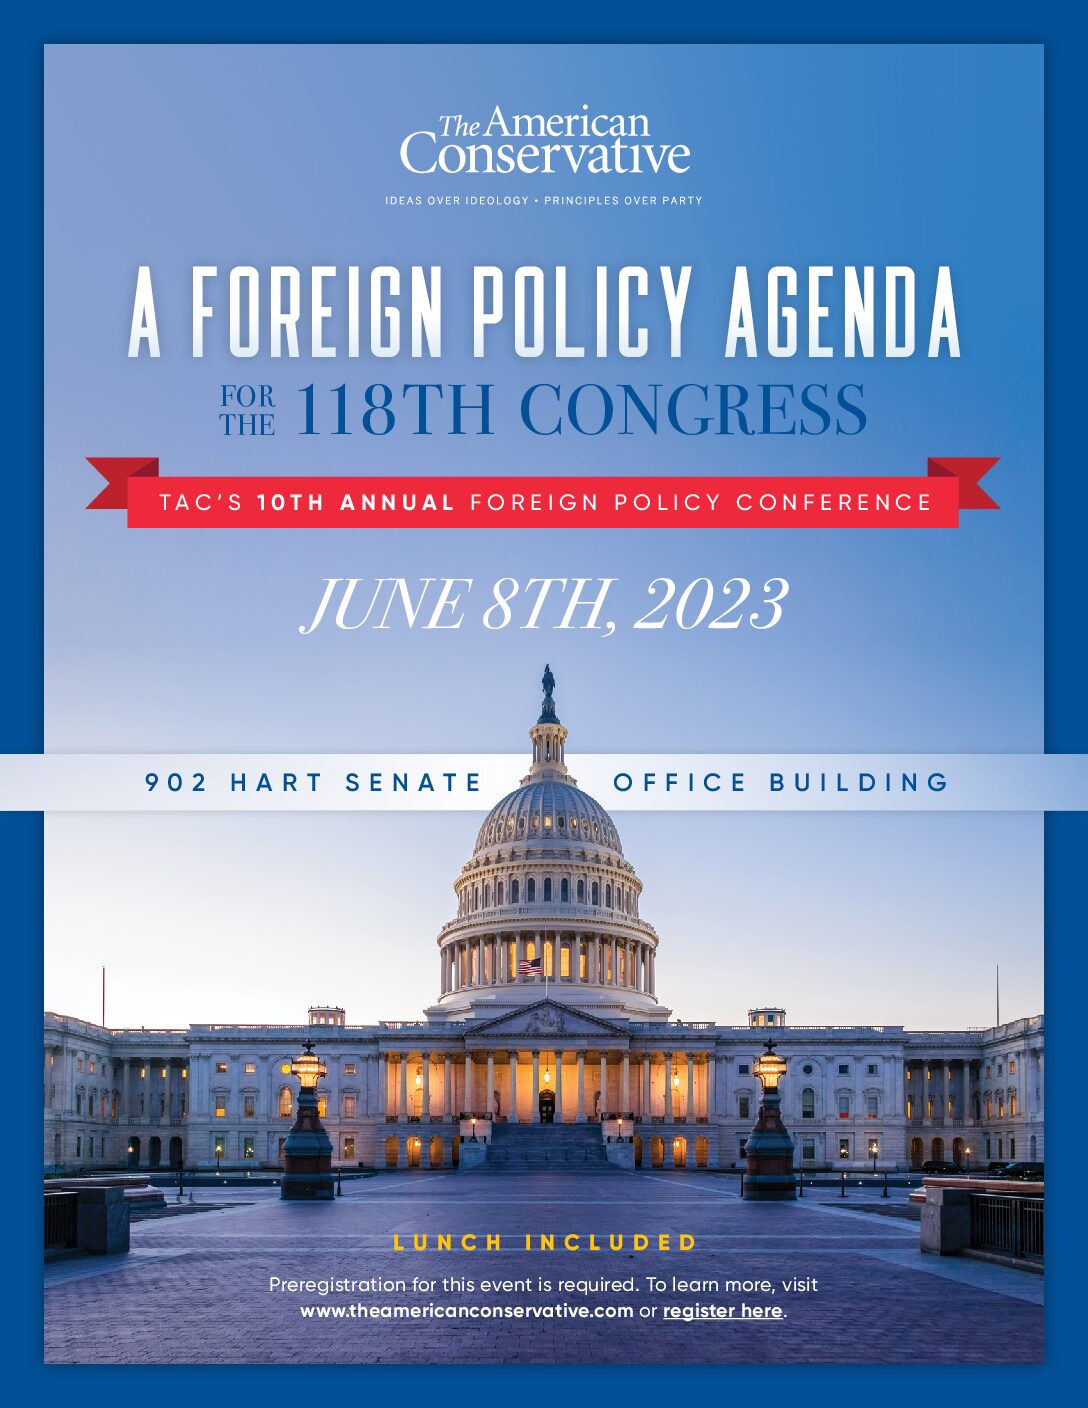 A Foreign Policy Agenda for the 118th Congress